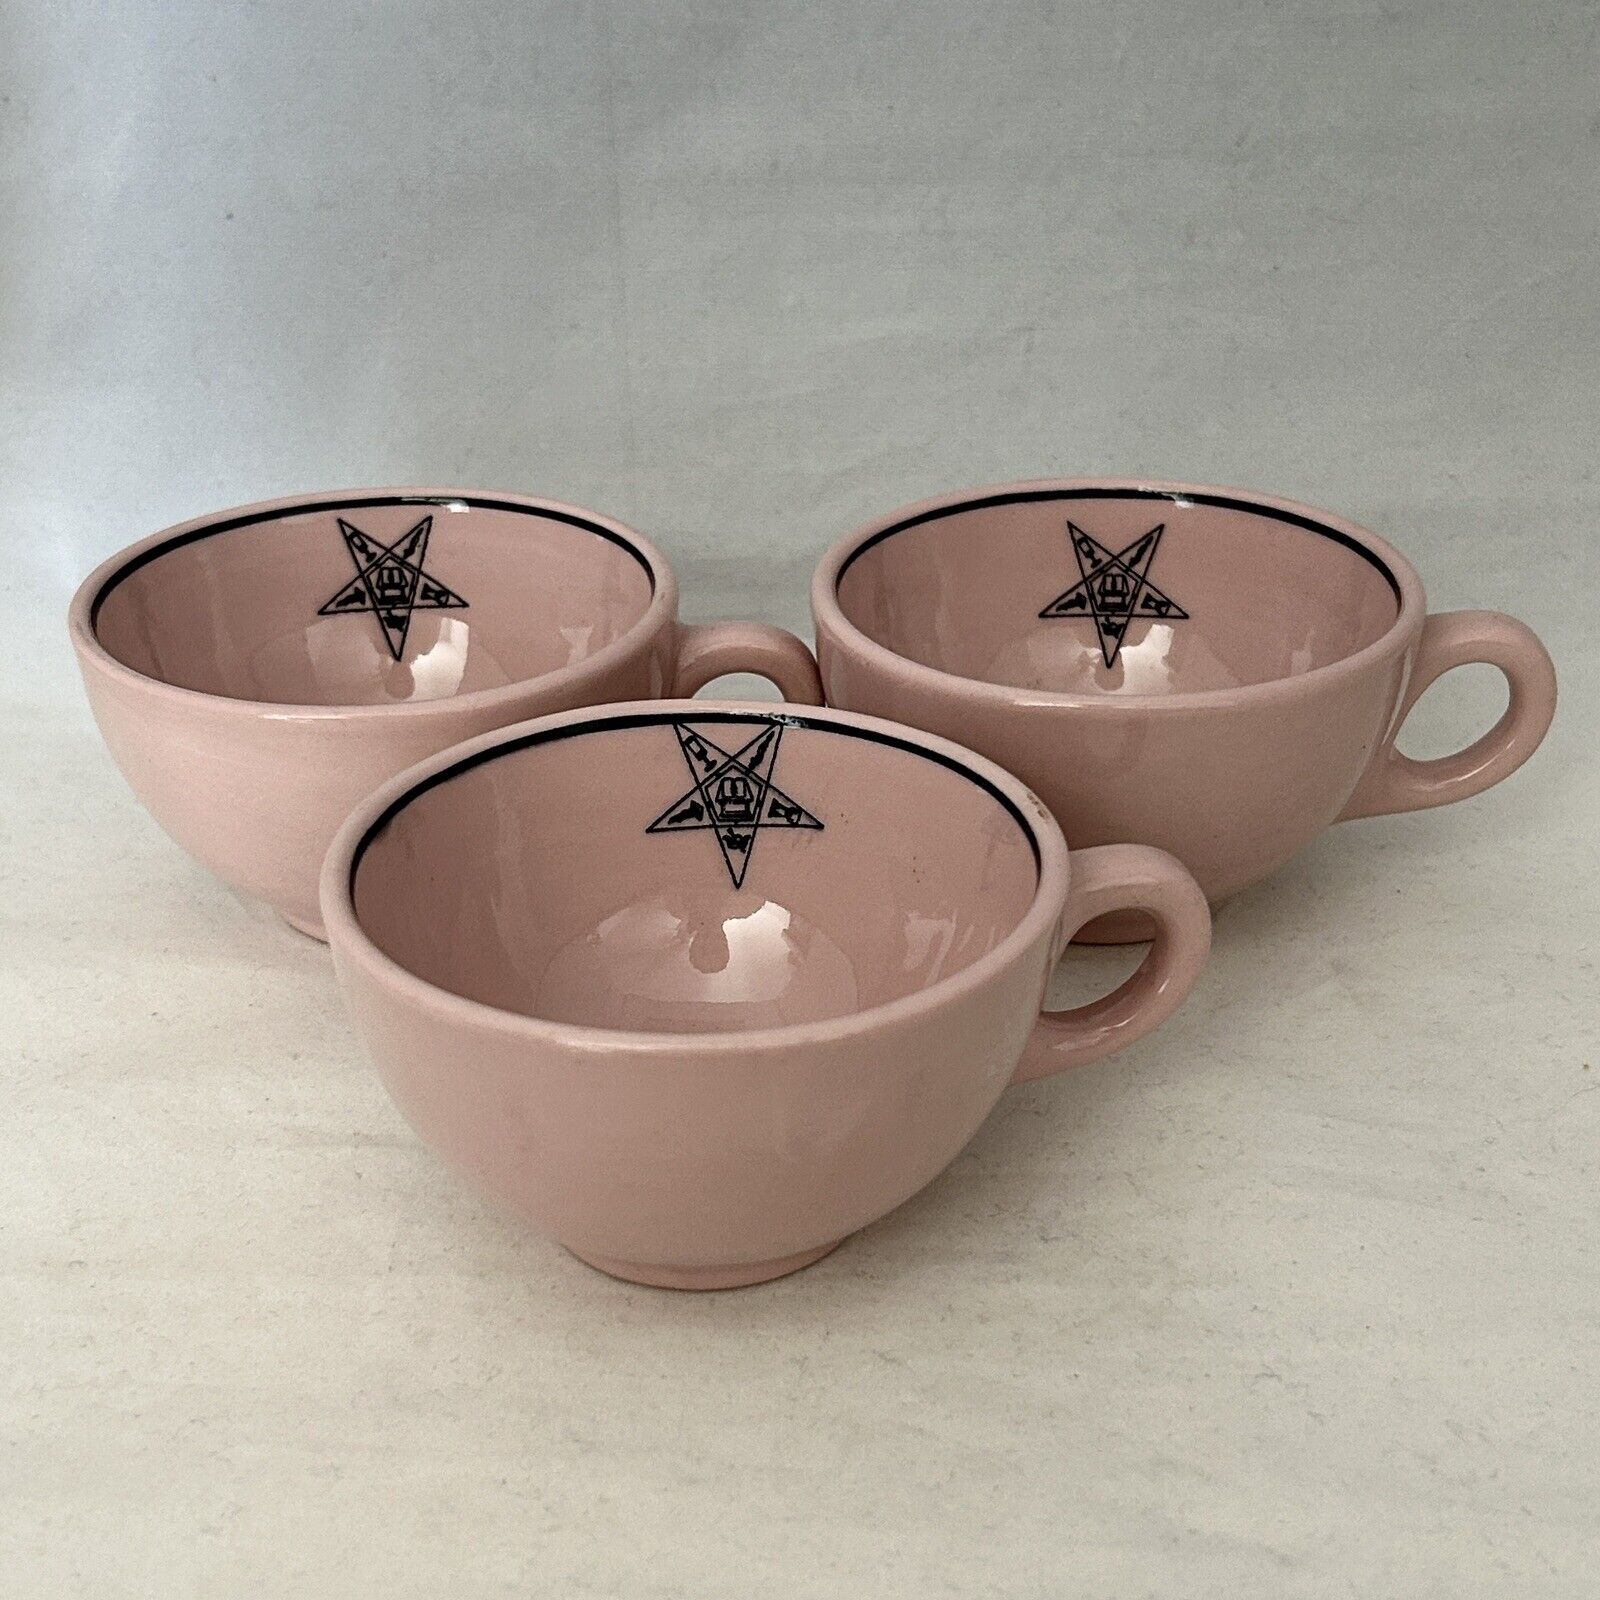 Vintage 50’s Set Of 3 MASONIC ORDER OF THE EASTERN STAR Pink Tepco China Cups